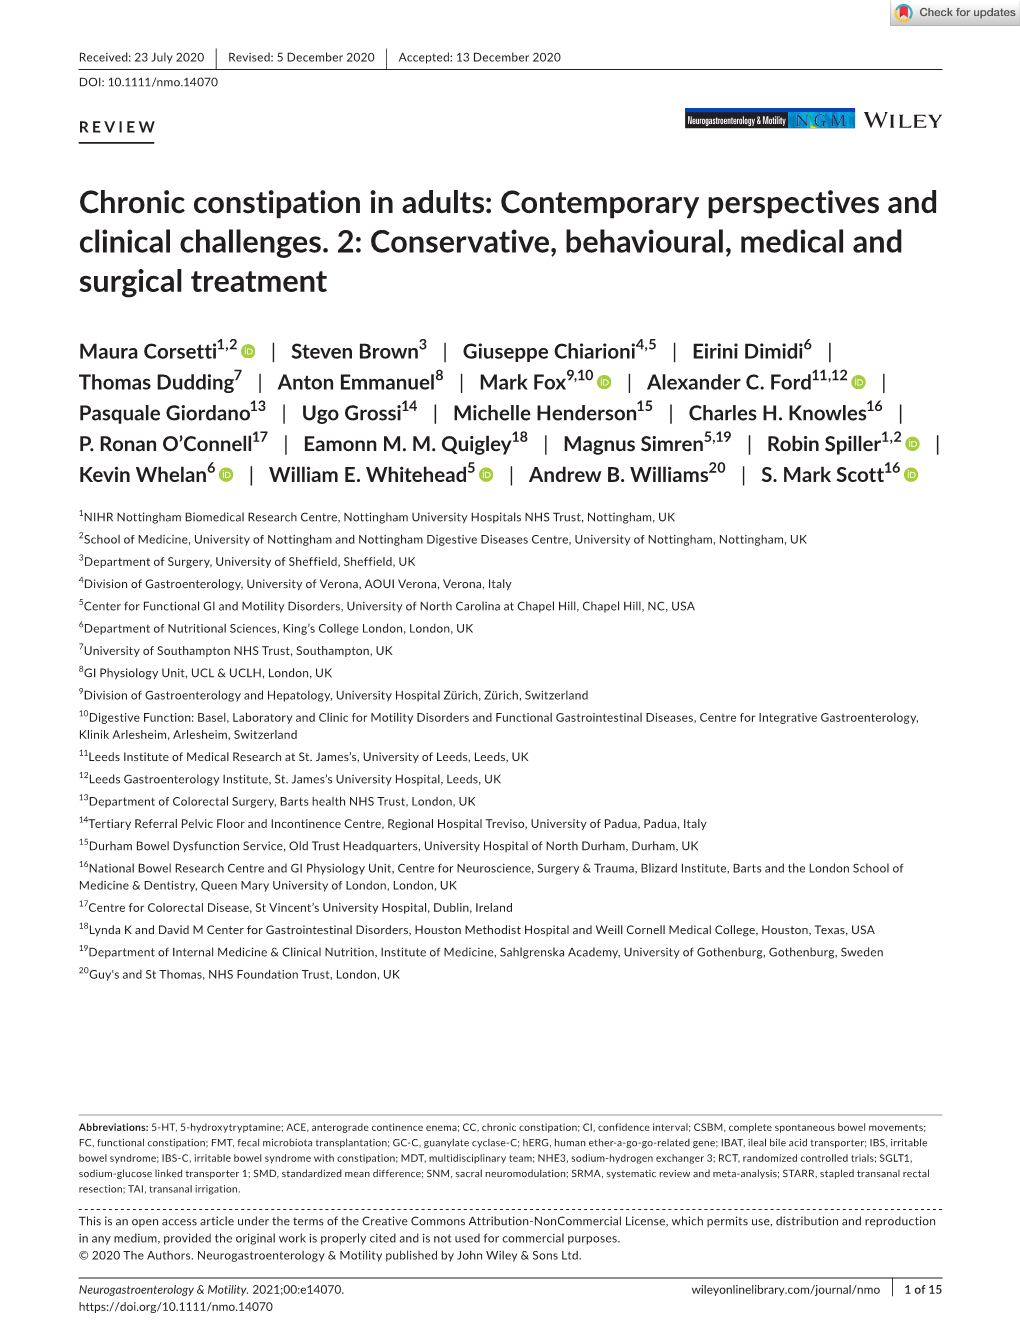 Chronic Constipation in Adults: Contemporary Perspectives and Clinical Challenges. 2: Conservative, Behavioural, Medical and Surgical Treatment